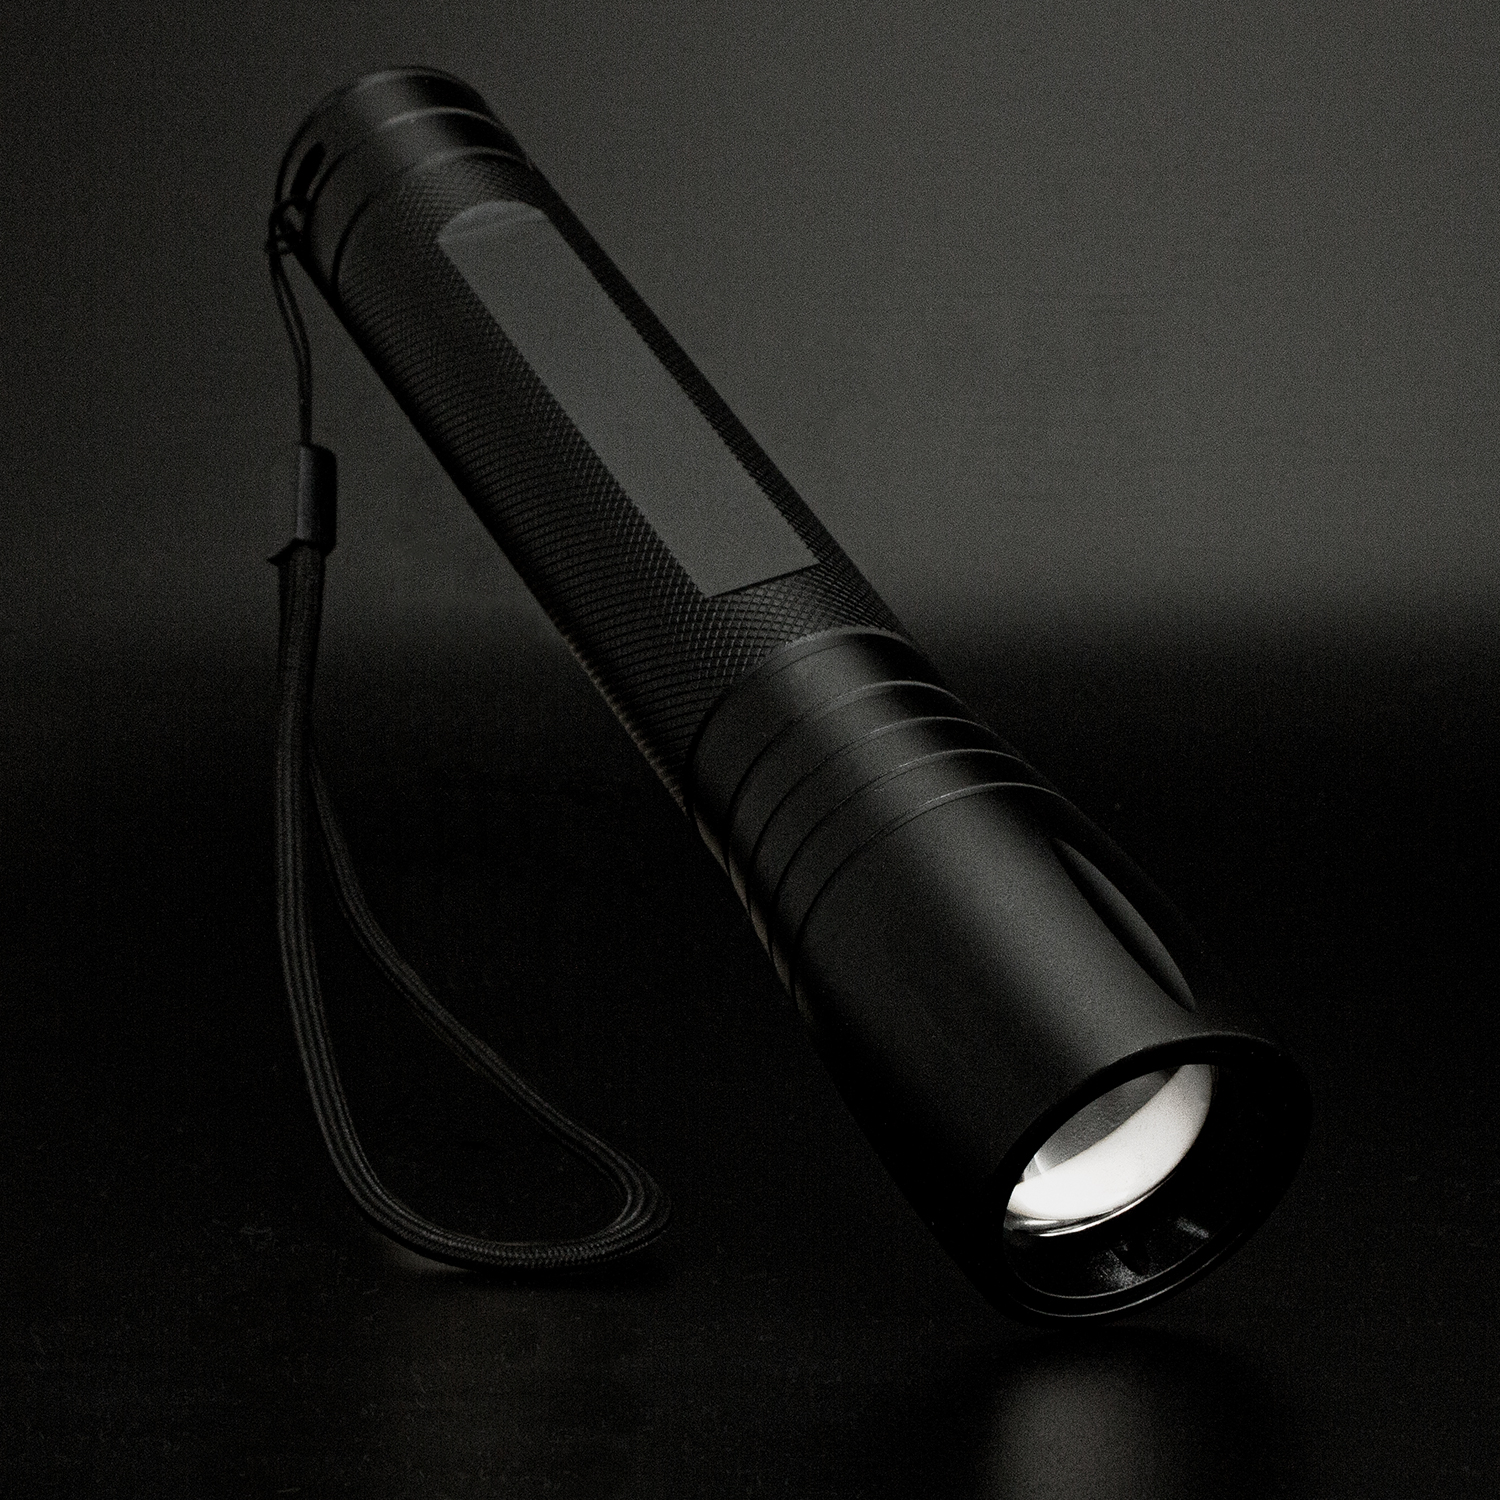 Swiss Peak 10W Cree Torch Features